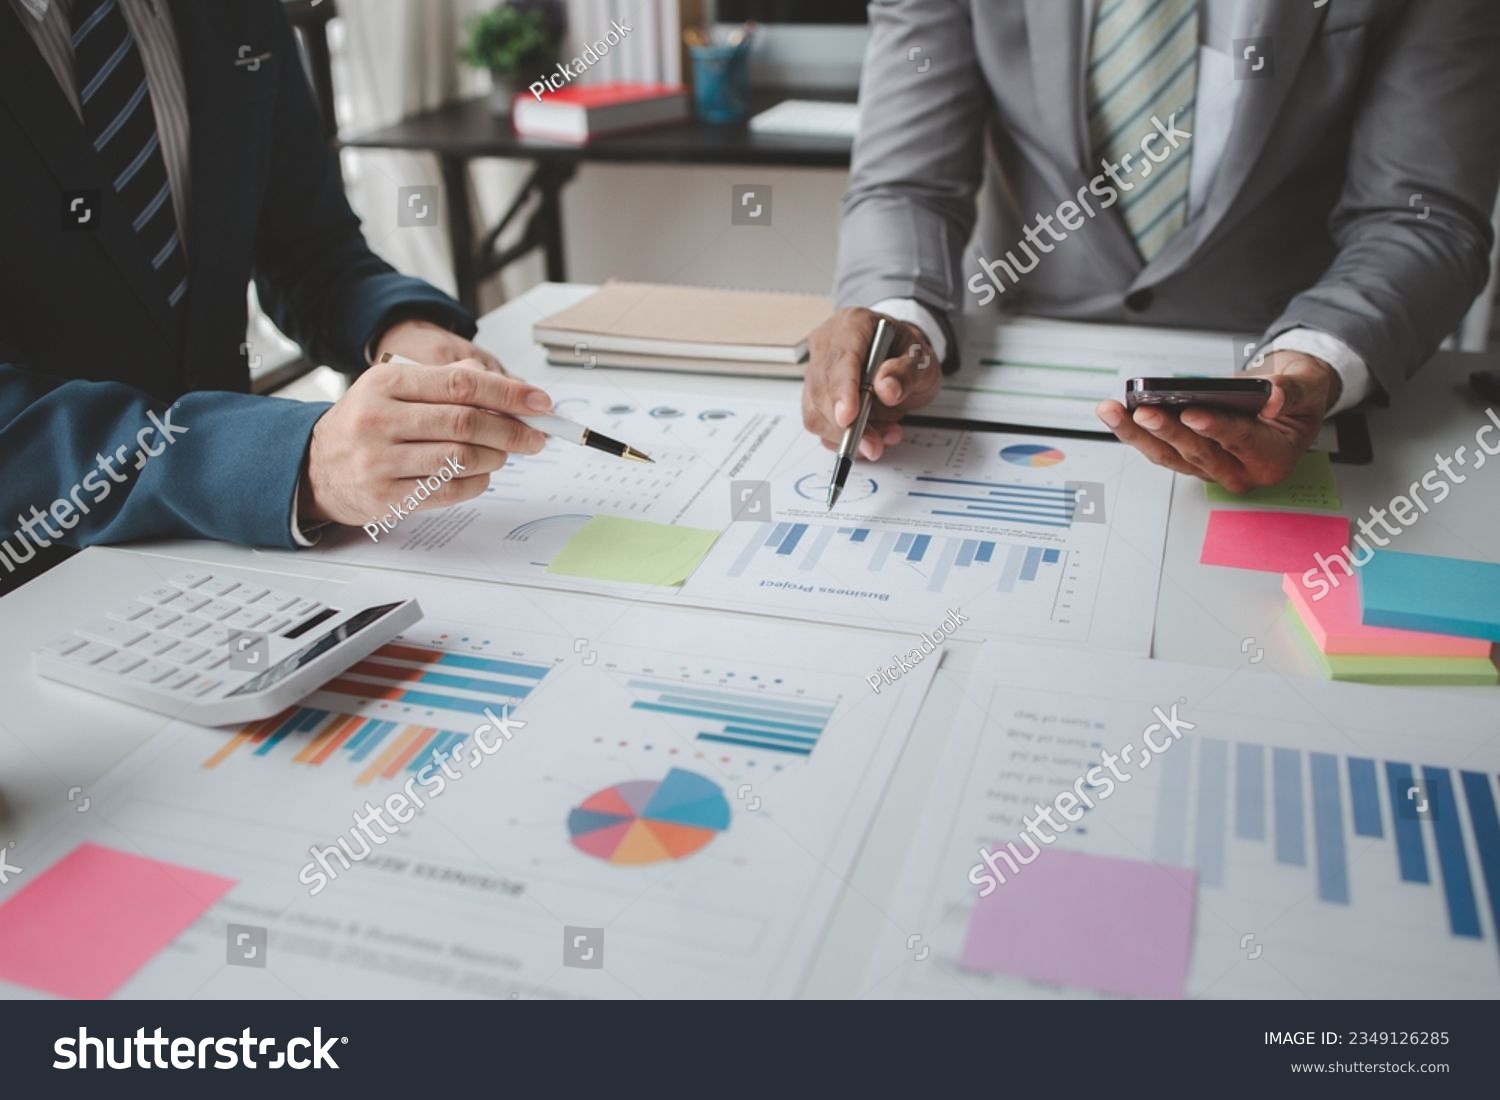 Atmosphere of a startup company meeting, business people are meeting together to summarize and plan investment finances, they are the founders of the company. Business administration concept. #2349126285